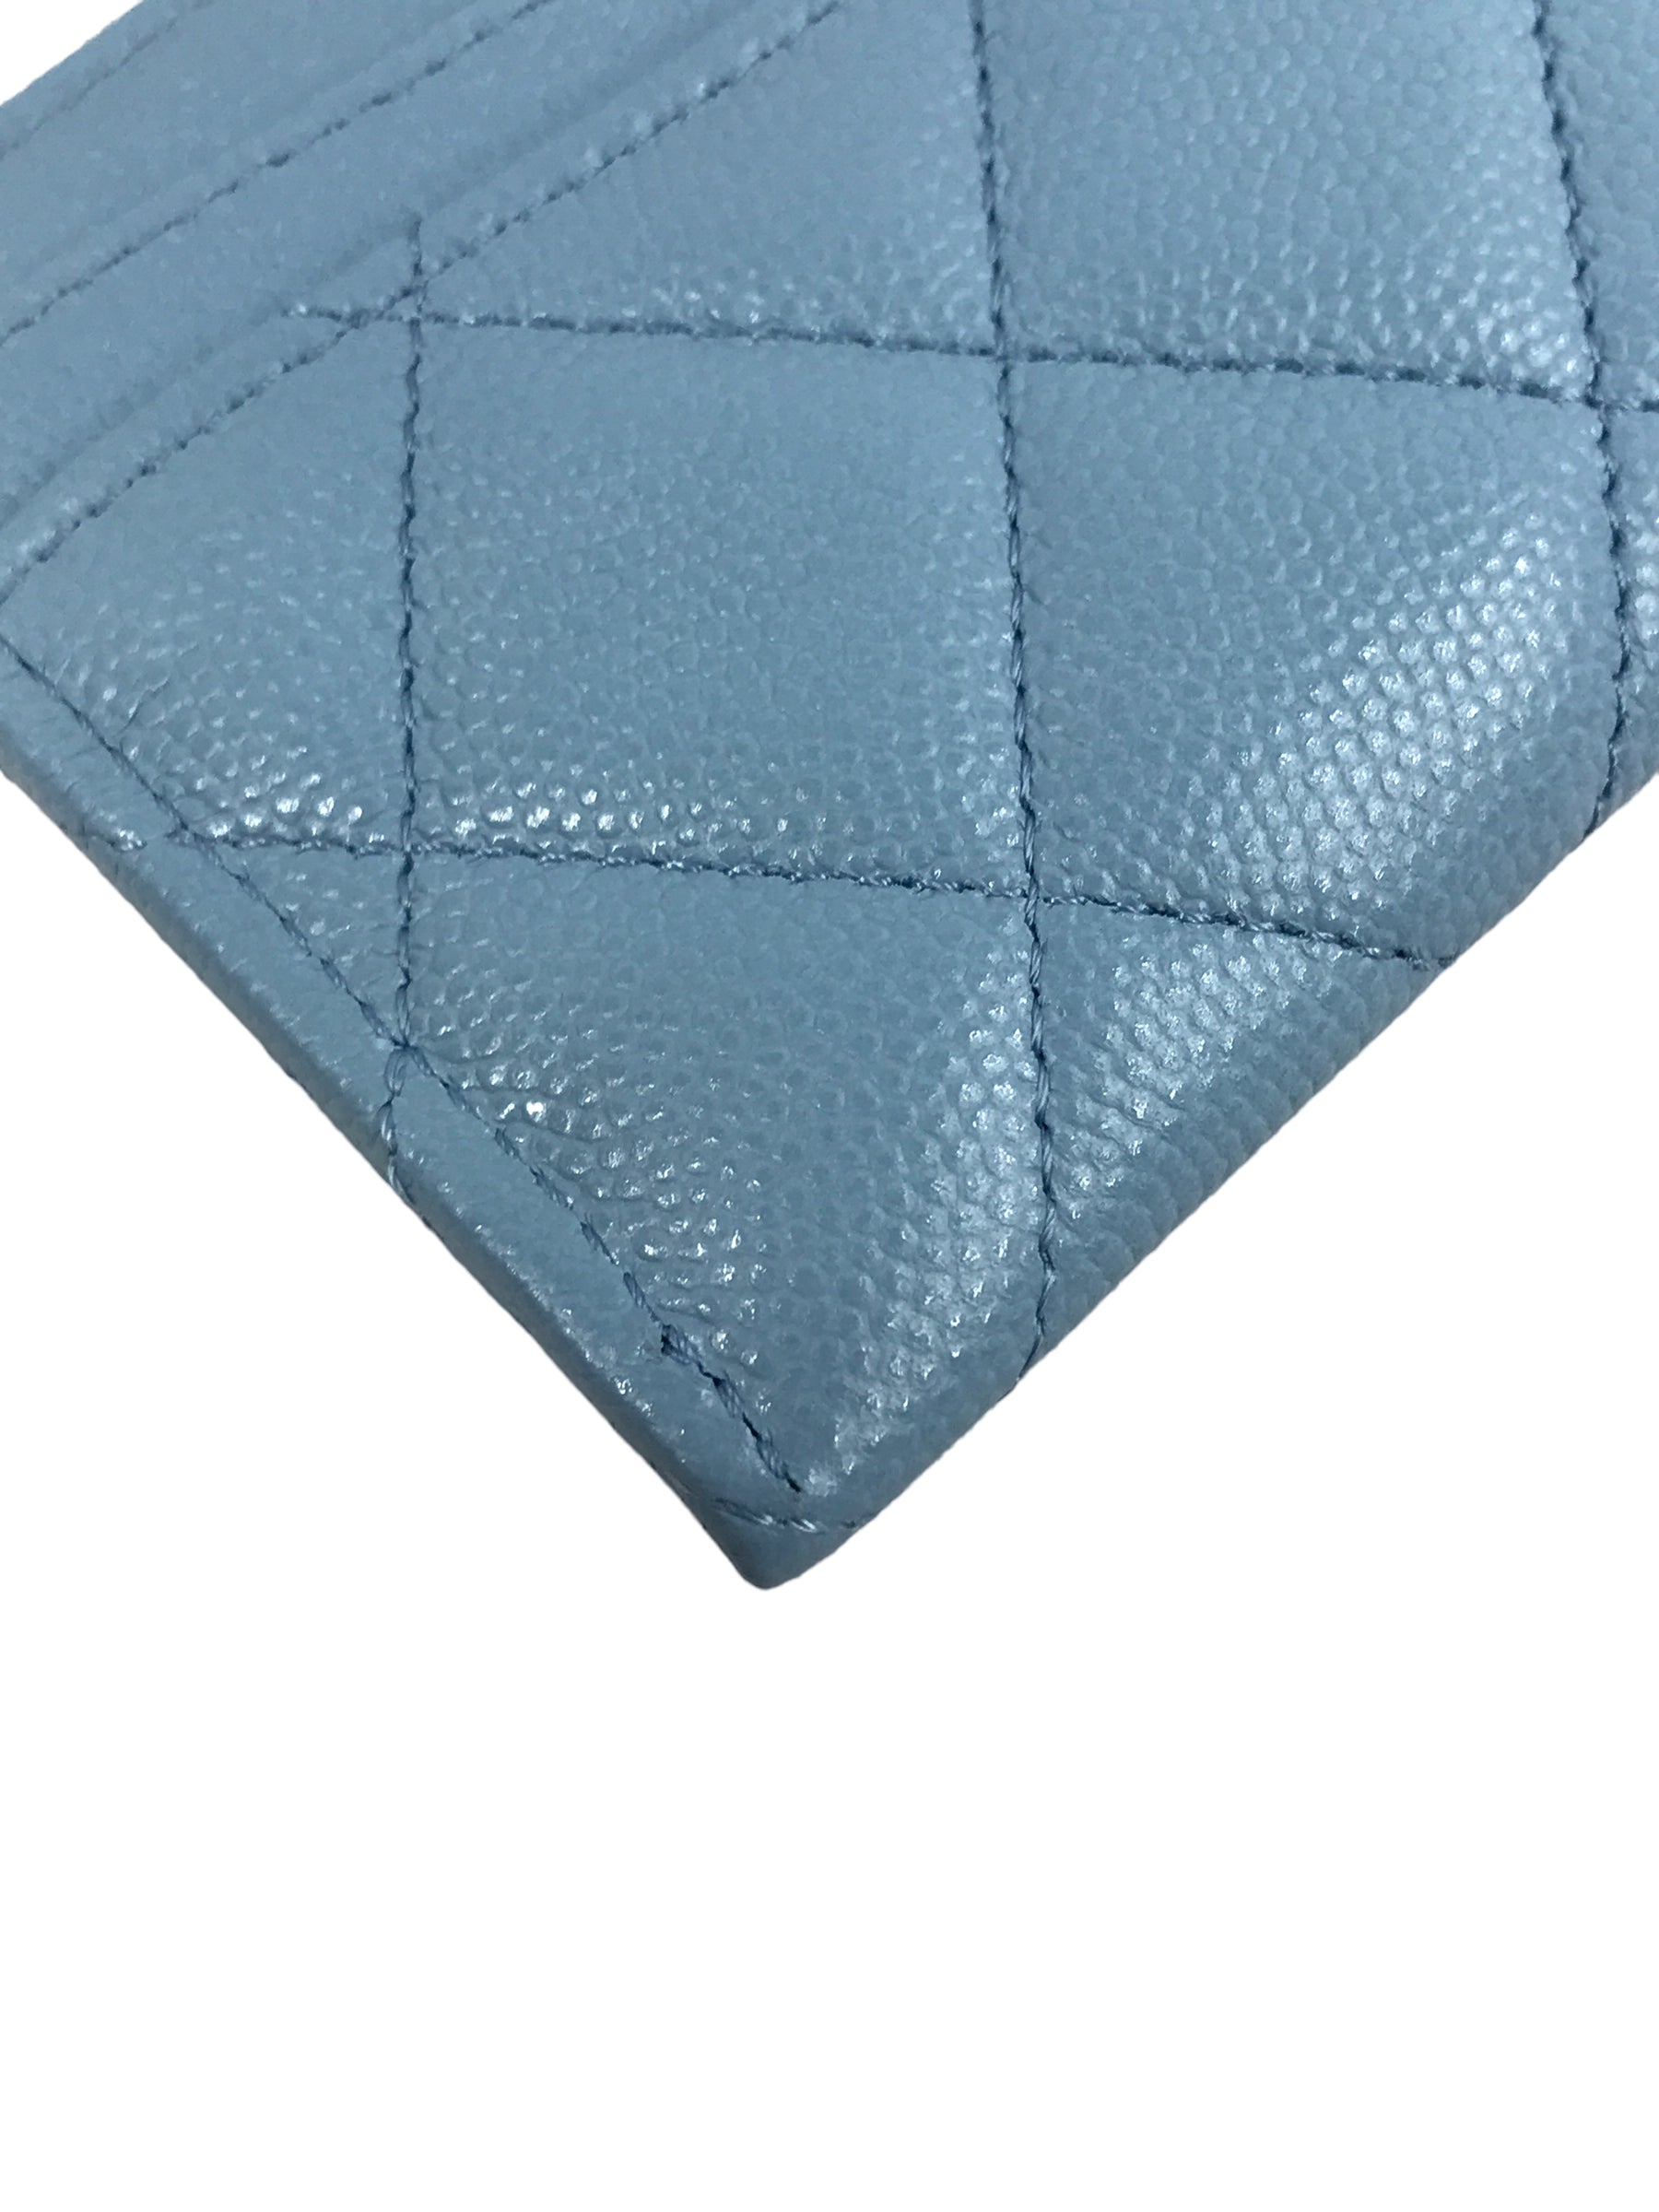 Baby Blue Caviar Quilted Card Case w/GHW